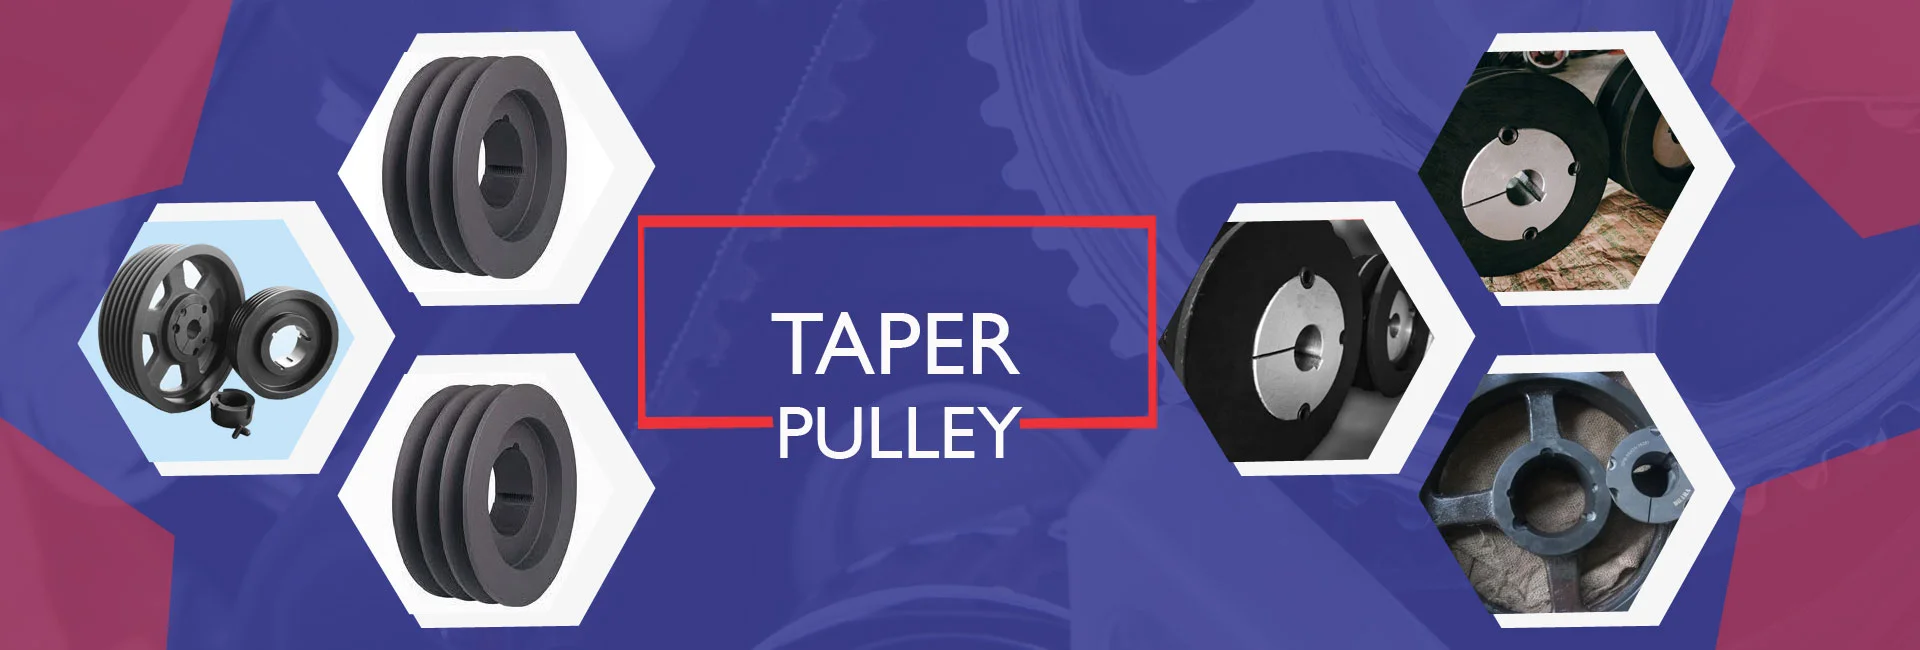 Taper Pulley Manufatcurer in Italy